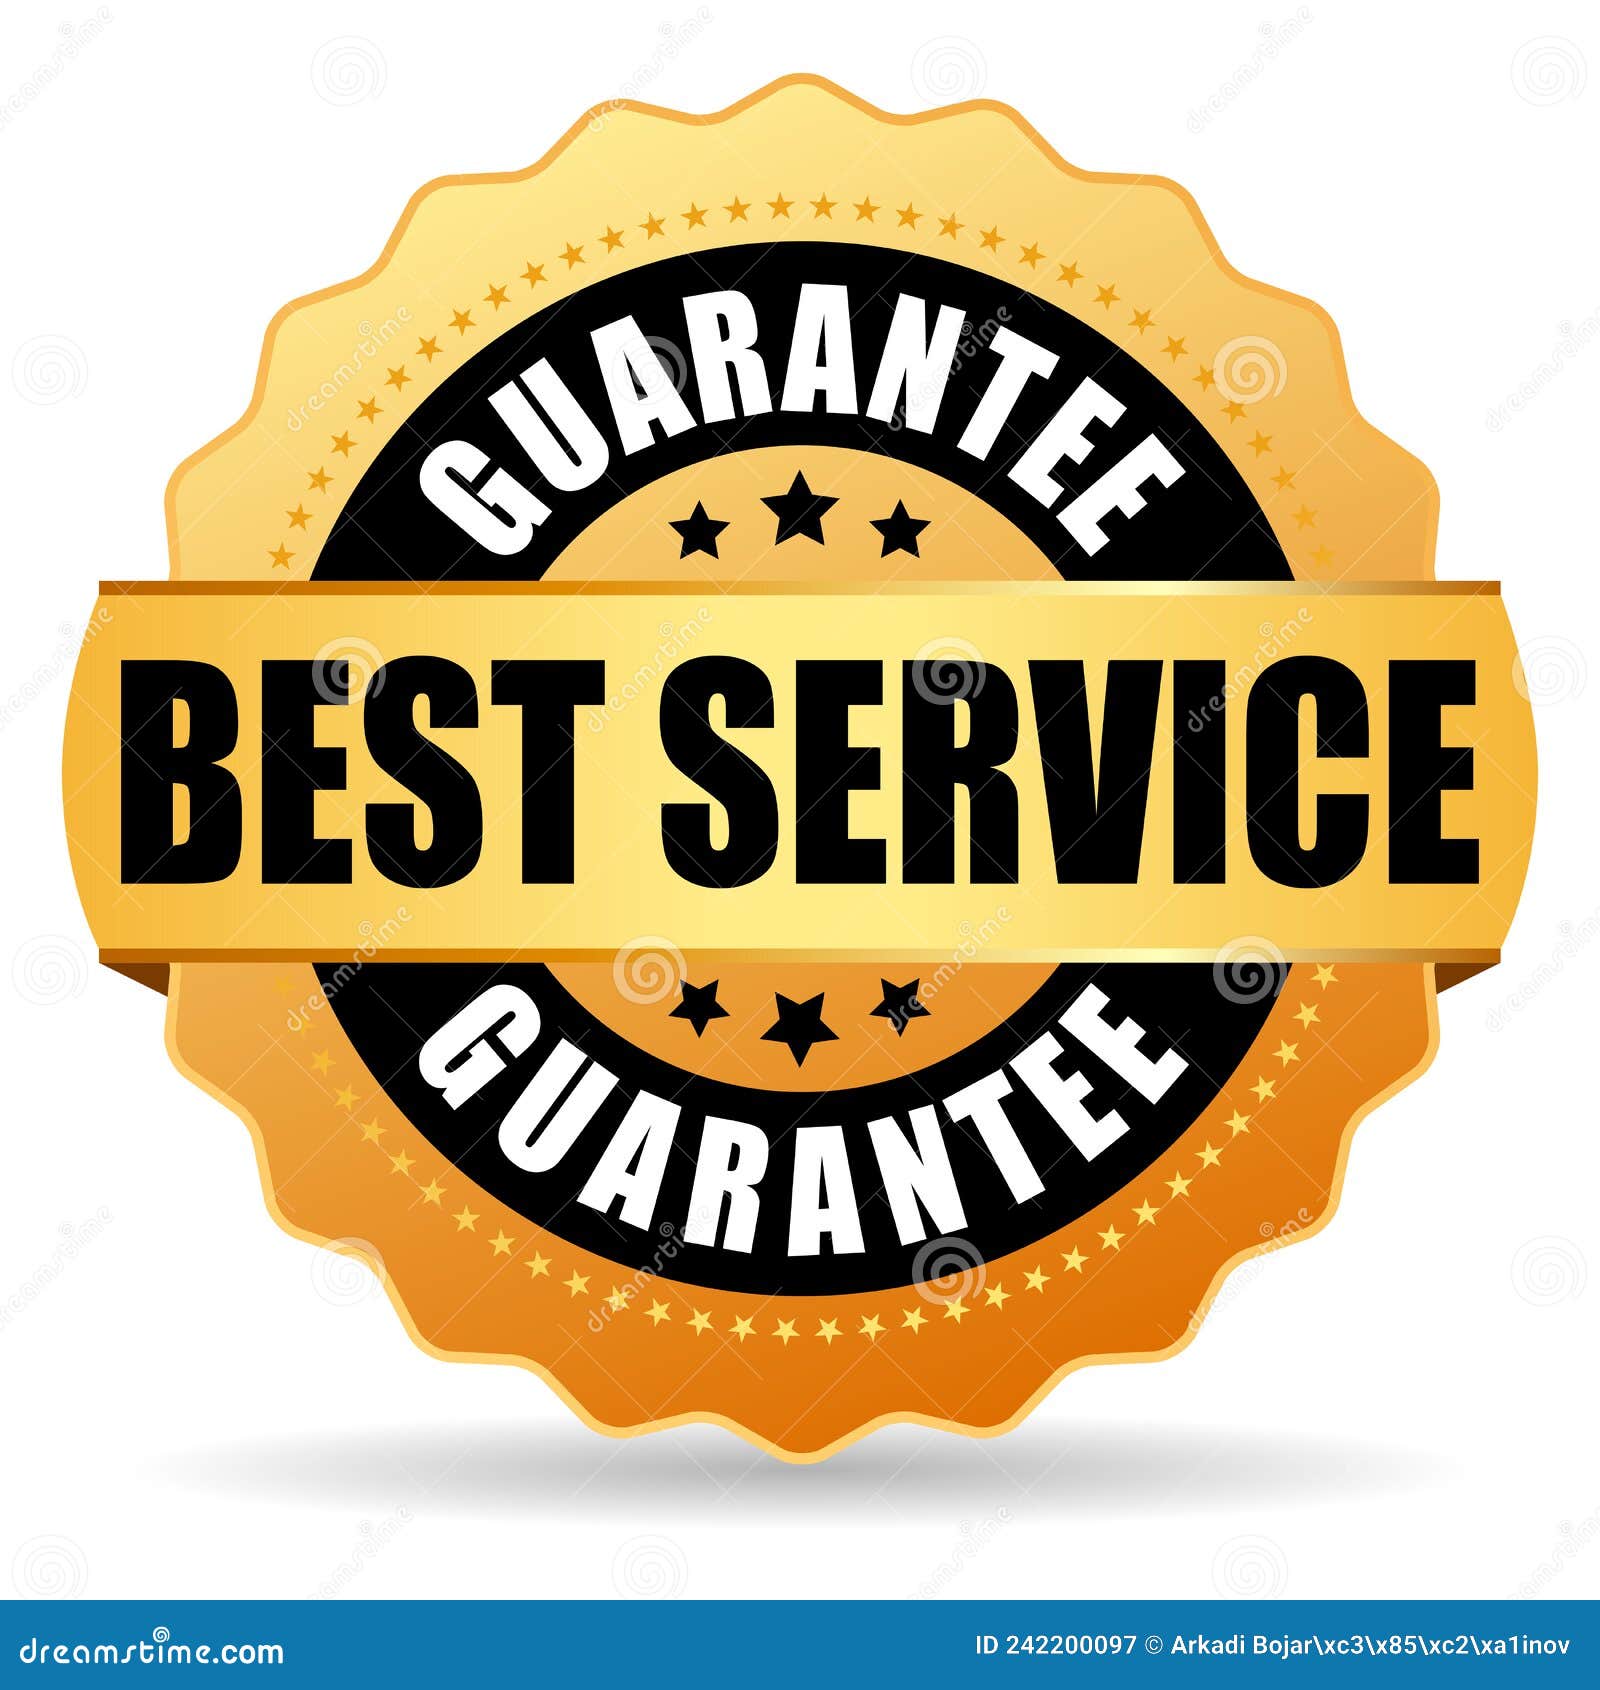 Best Service Guarantee Vector Seal Stock Vector Illustration of high